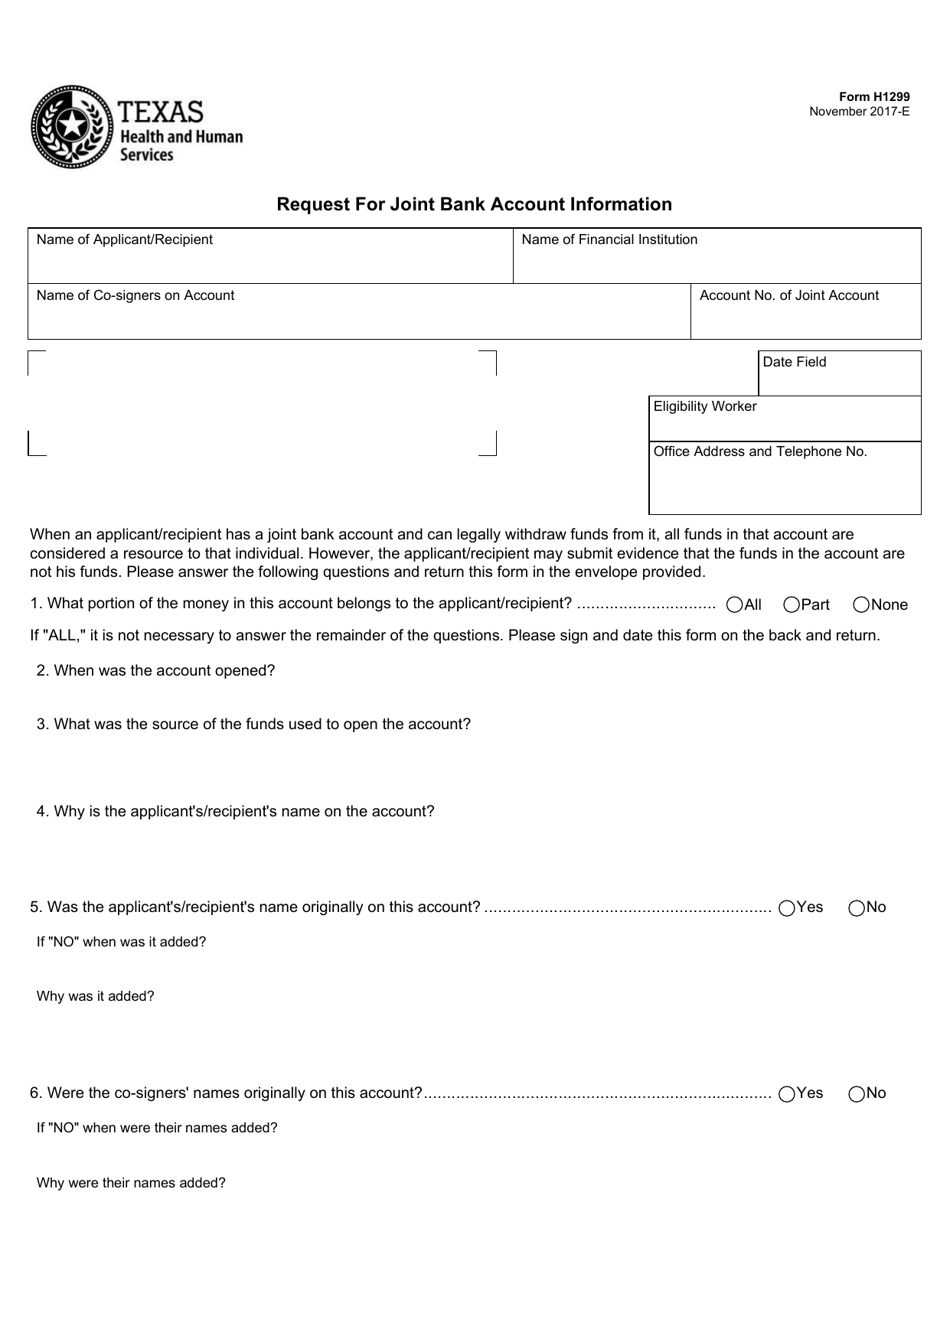 Form H1299 Request for Joint Bank Account Information - Texas, Page 1